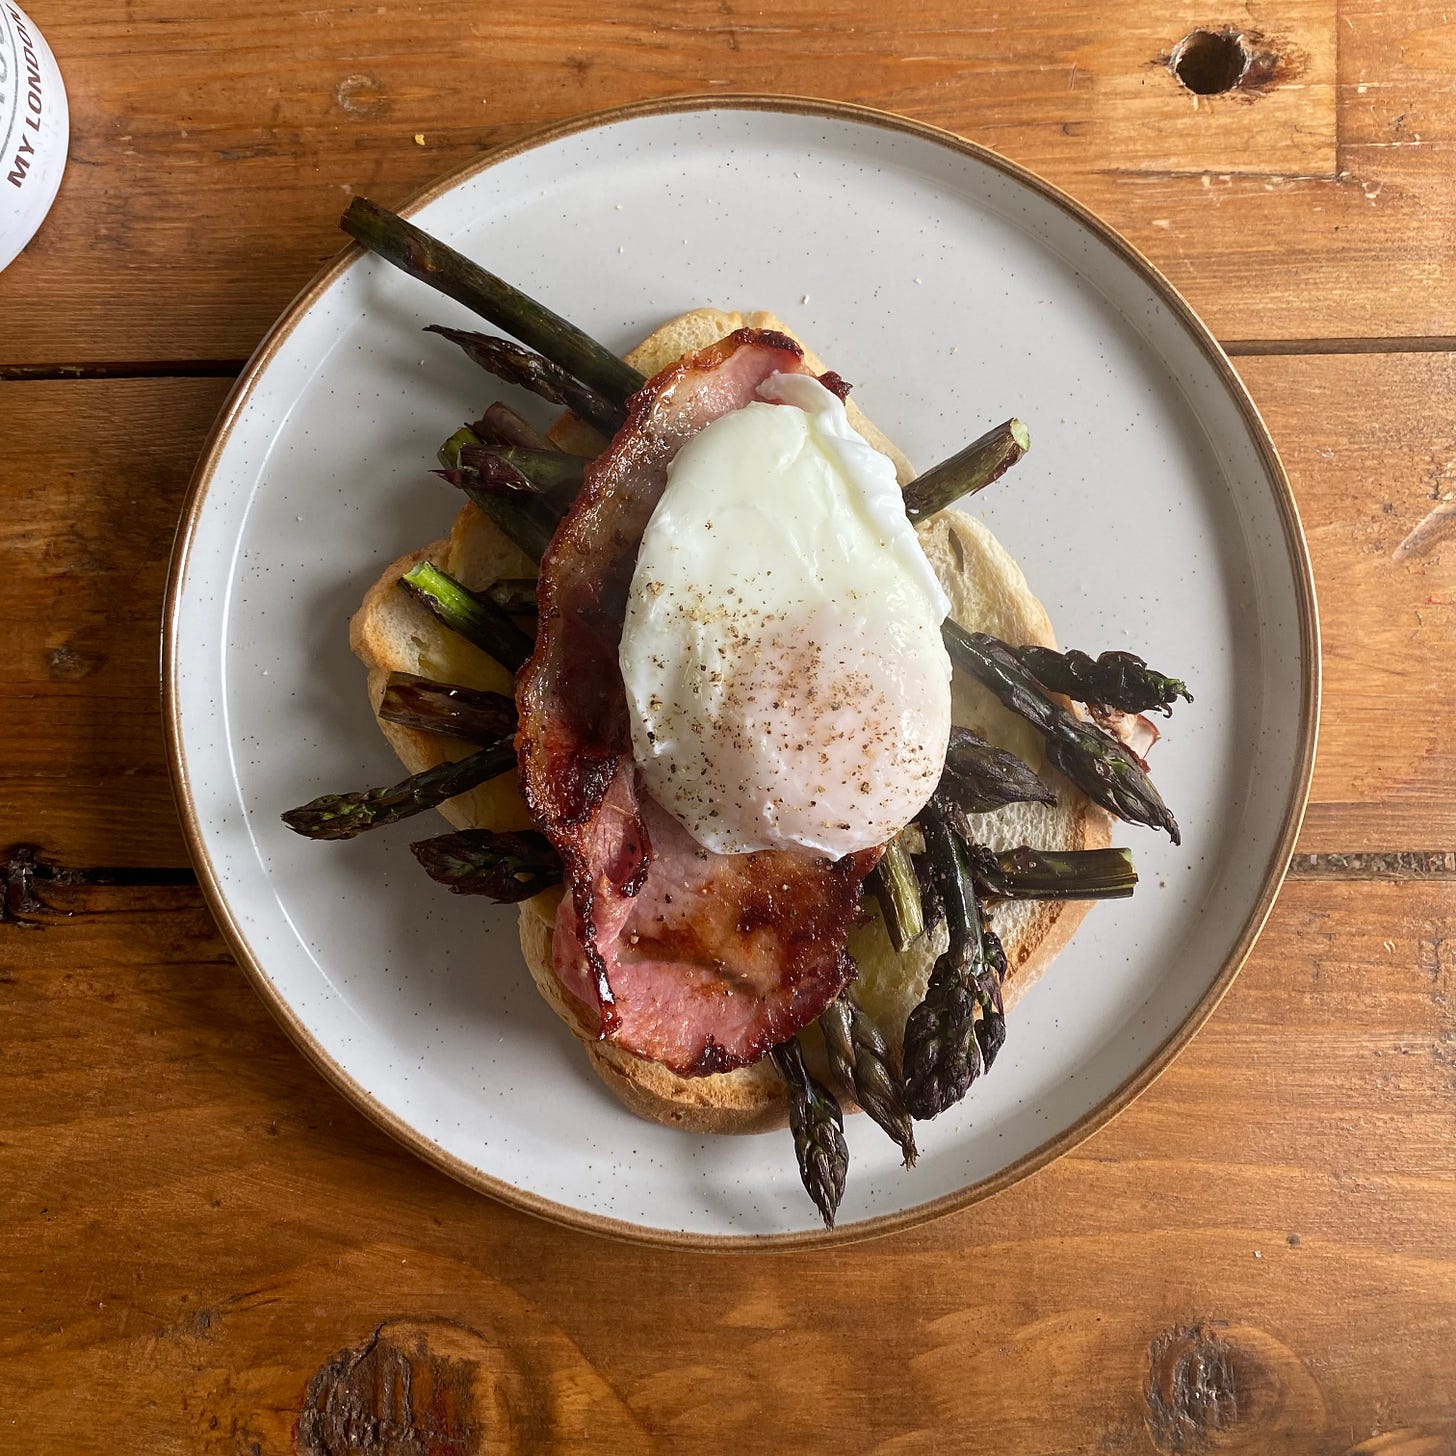 Plate with toast, bacon, asparagus and a poached egg